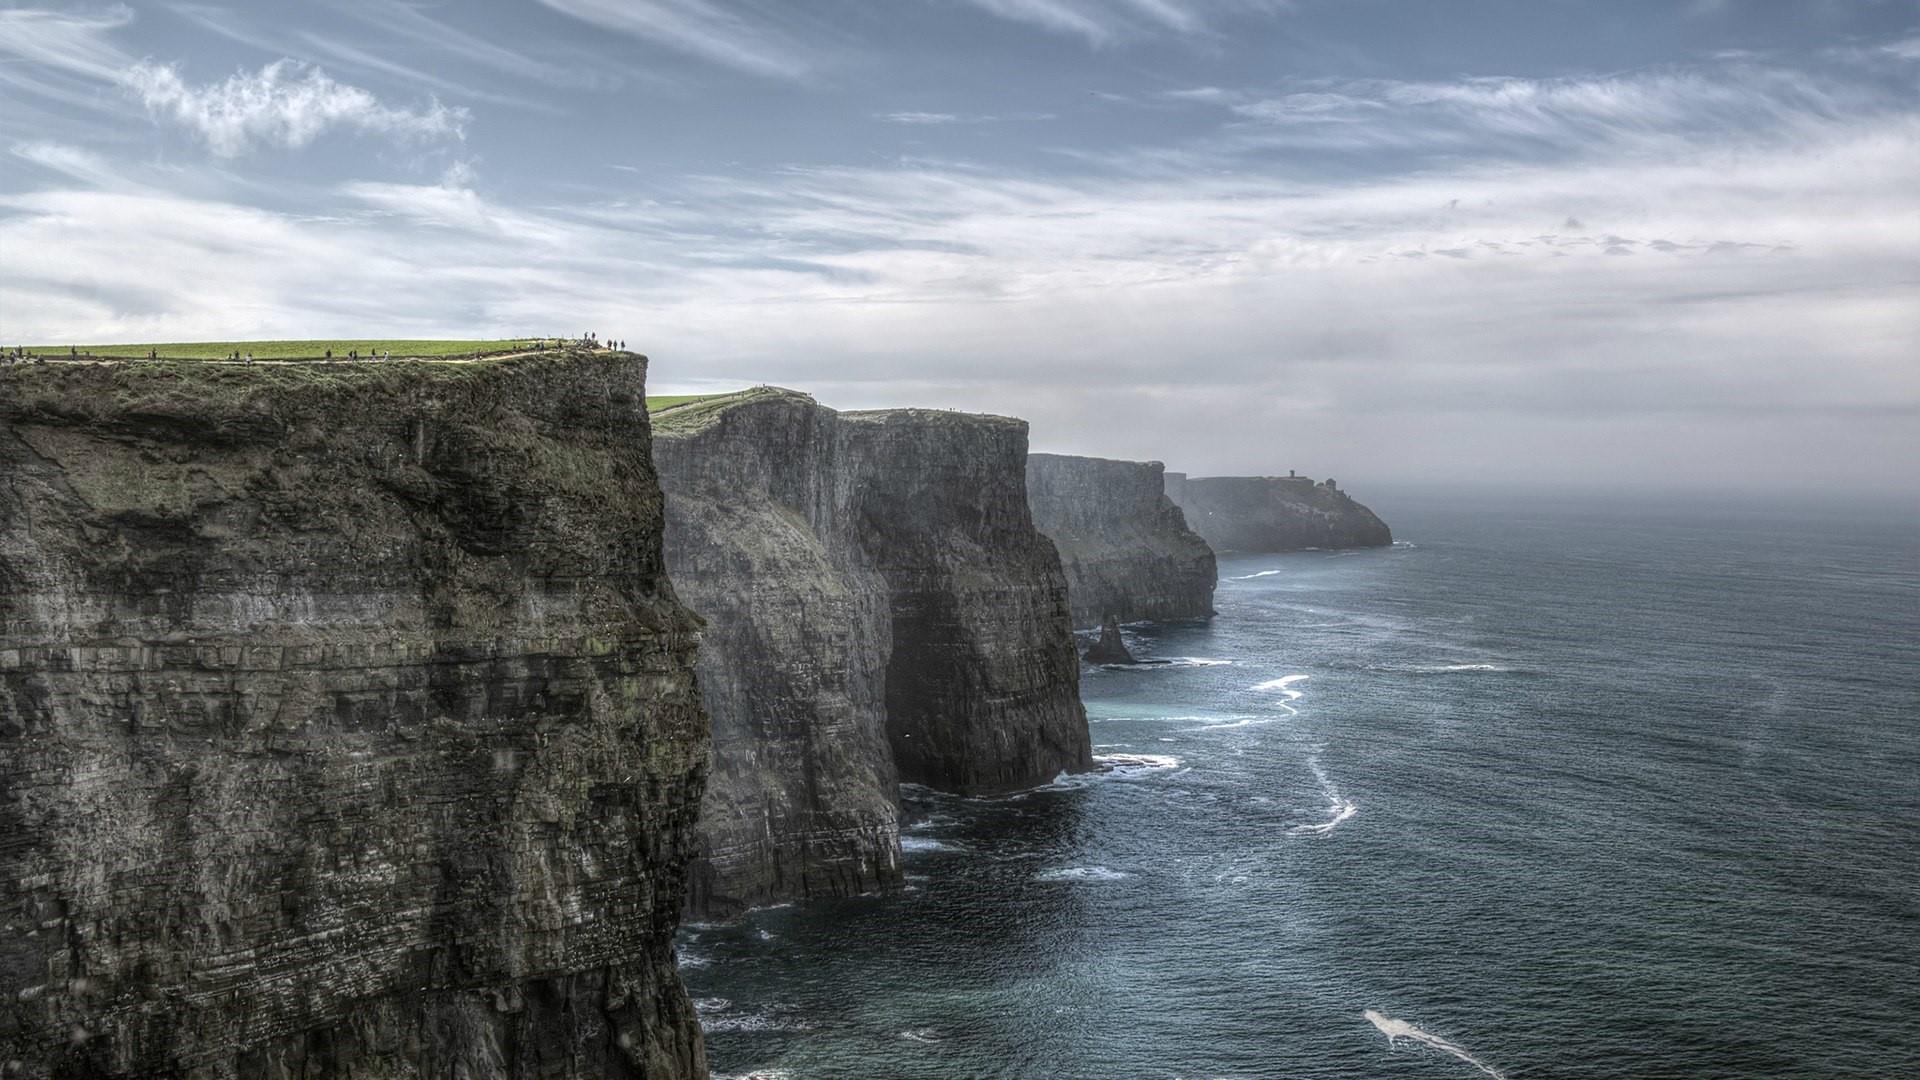 Cliffs of Moher Wallpapers and Background Images   stmednet